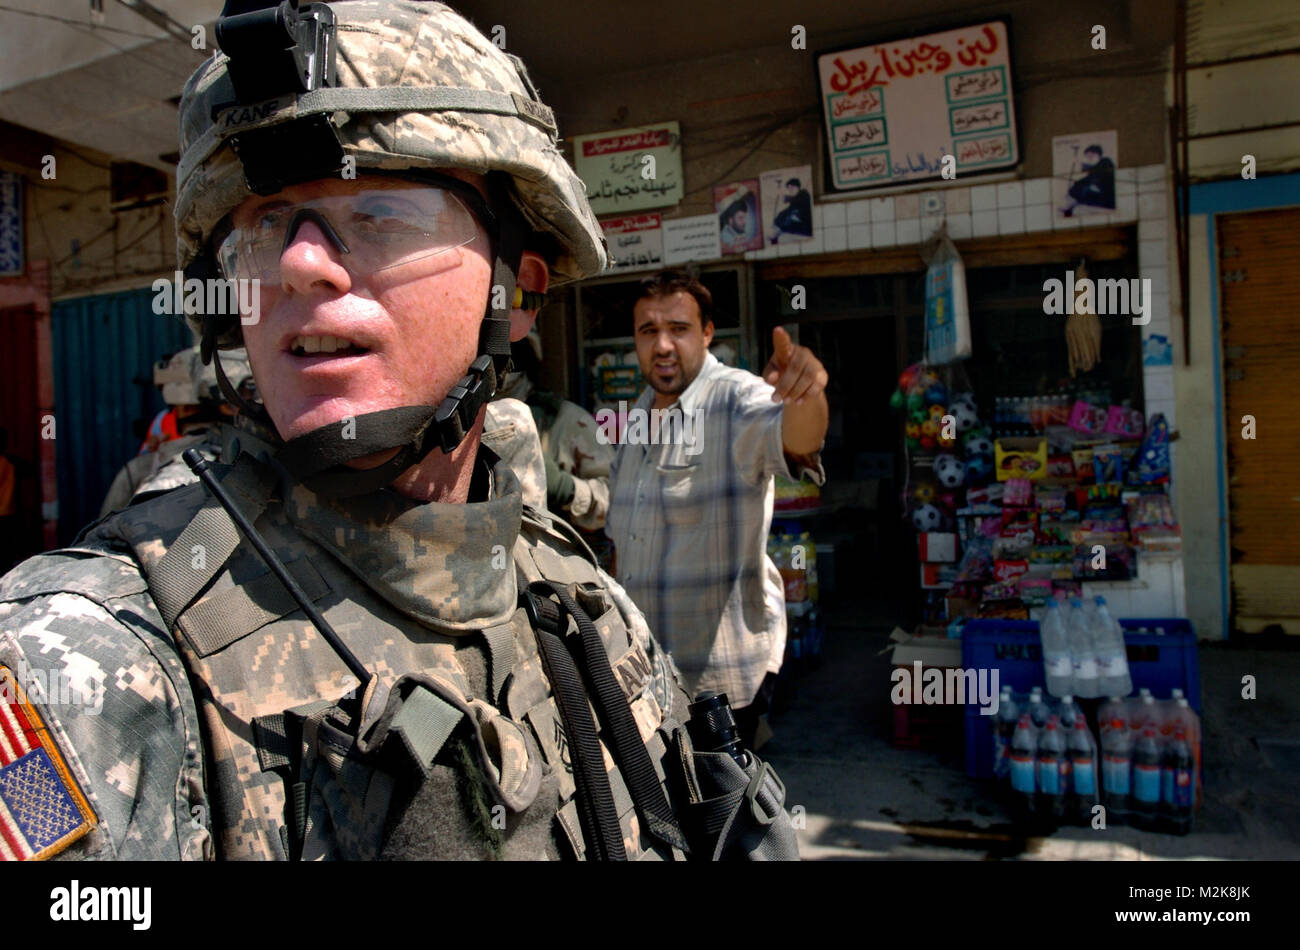 060703-N-7586B-121  U.S. Army Sgt. 1st Class Joe Kane patrols the streets in East Baghdad, Iraq, on July 3, 2006.  Kane is assigned to Delta Company, 3rd Battalion, 67th Armor Regiment, 506th Regimental Combat Team, 101st Airborne Division.  DoD photo by Petty Officer 1st Class Bart A. Bauer, U.S. Navy.  (Released) Over there by United States Forces - Iraq (Inactive) Stock Photo